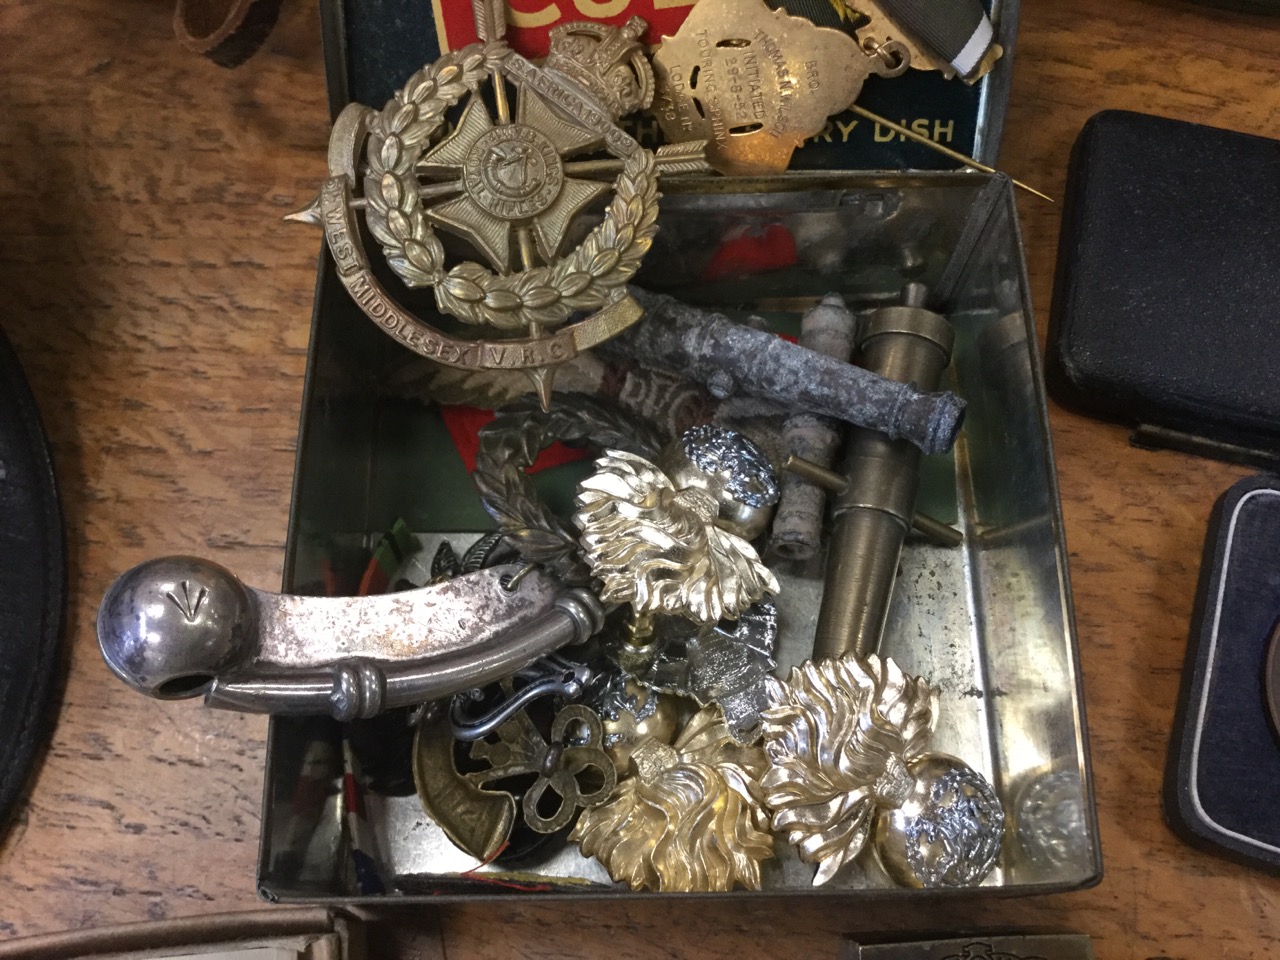 Miscellaneous items including an 1884 pewter rifle trophy, a boxed gun cleaning kit, - Image 3 of 3